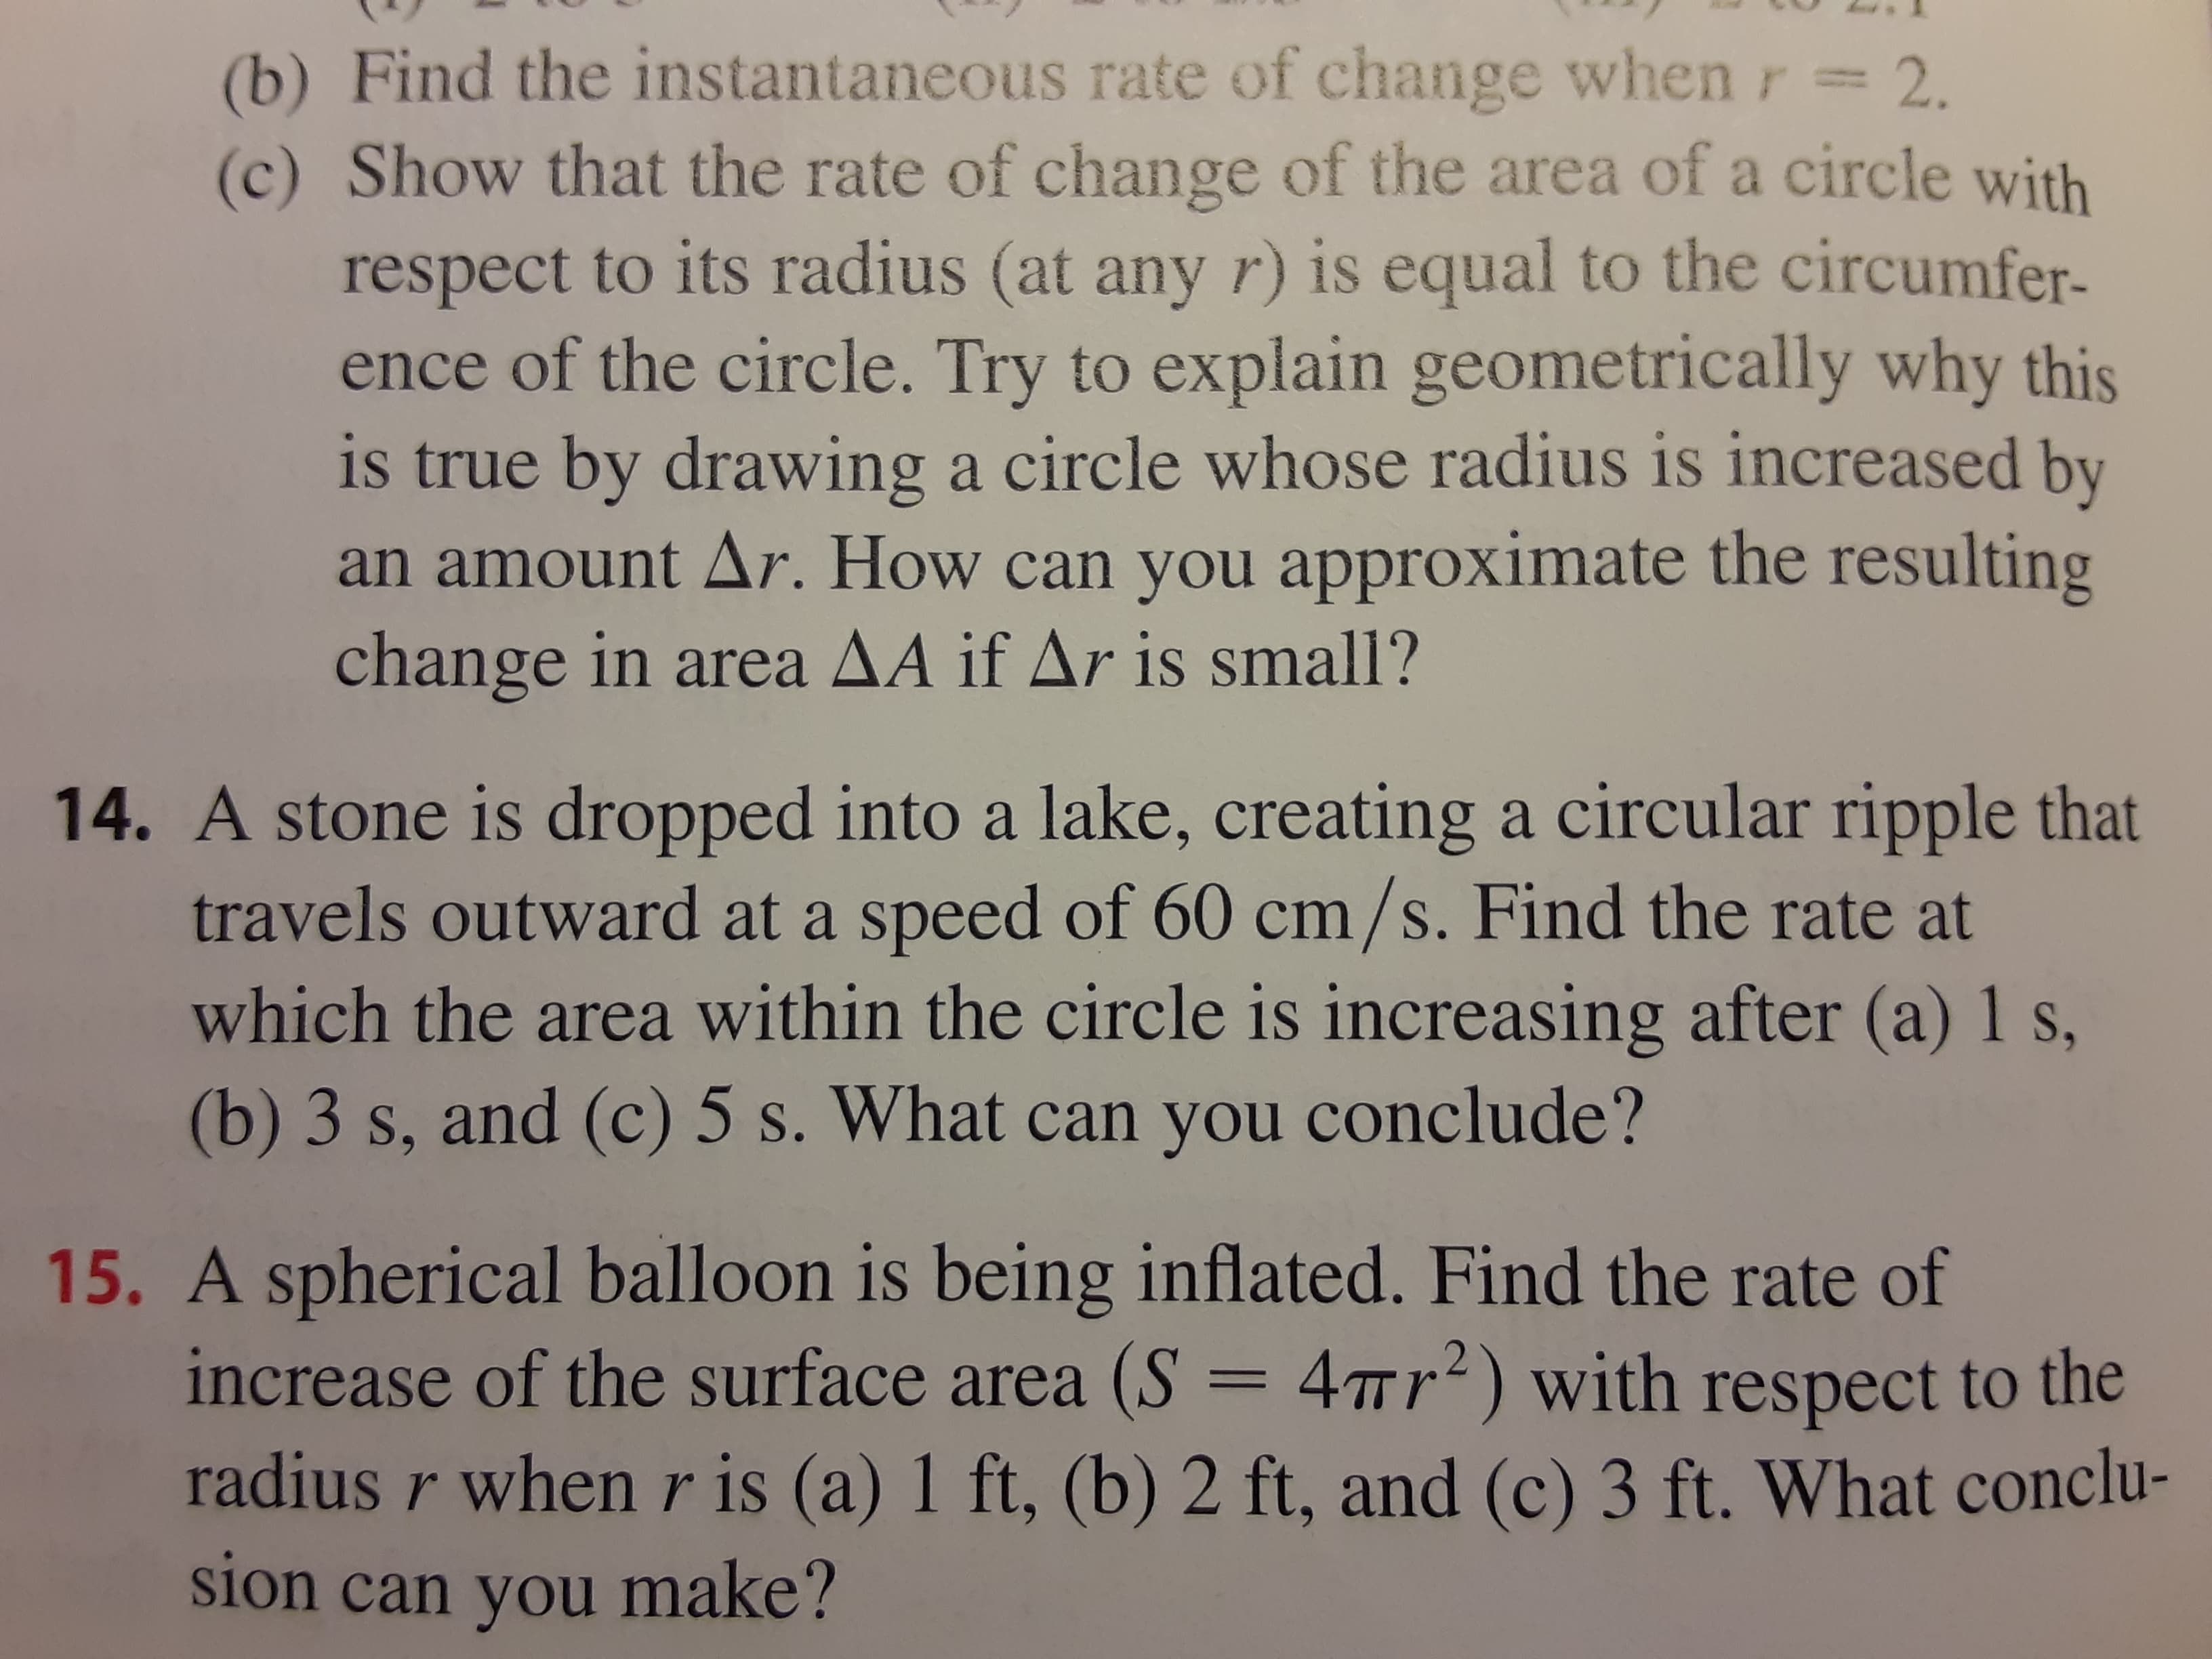 A stone is dropped into a lake, creating a circular ripple that
travels outward at a speed of 60 cm/s. Find the rate at
which the area within the circle is increasing after (a) 1 s,
(b) 3 s, and (c) 5 s. What can you conclude?
